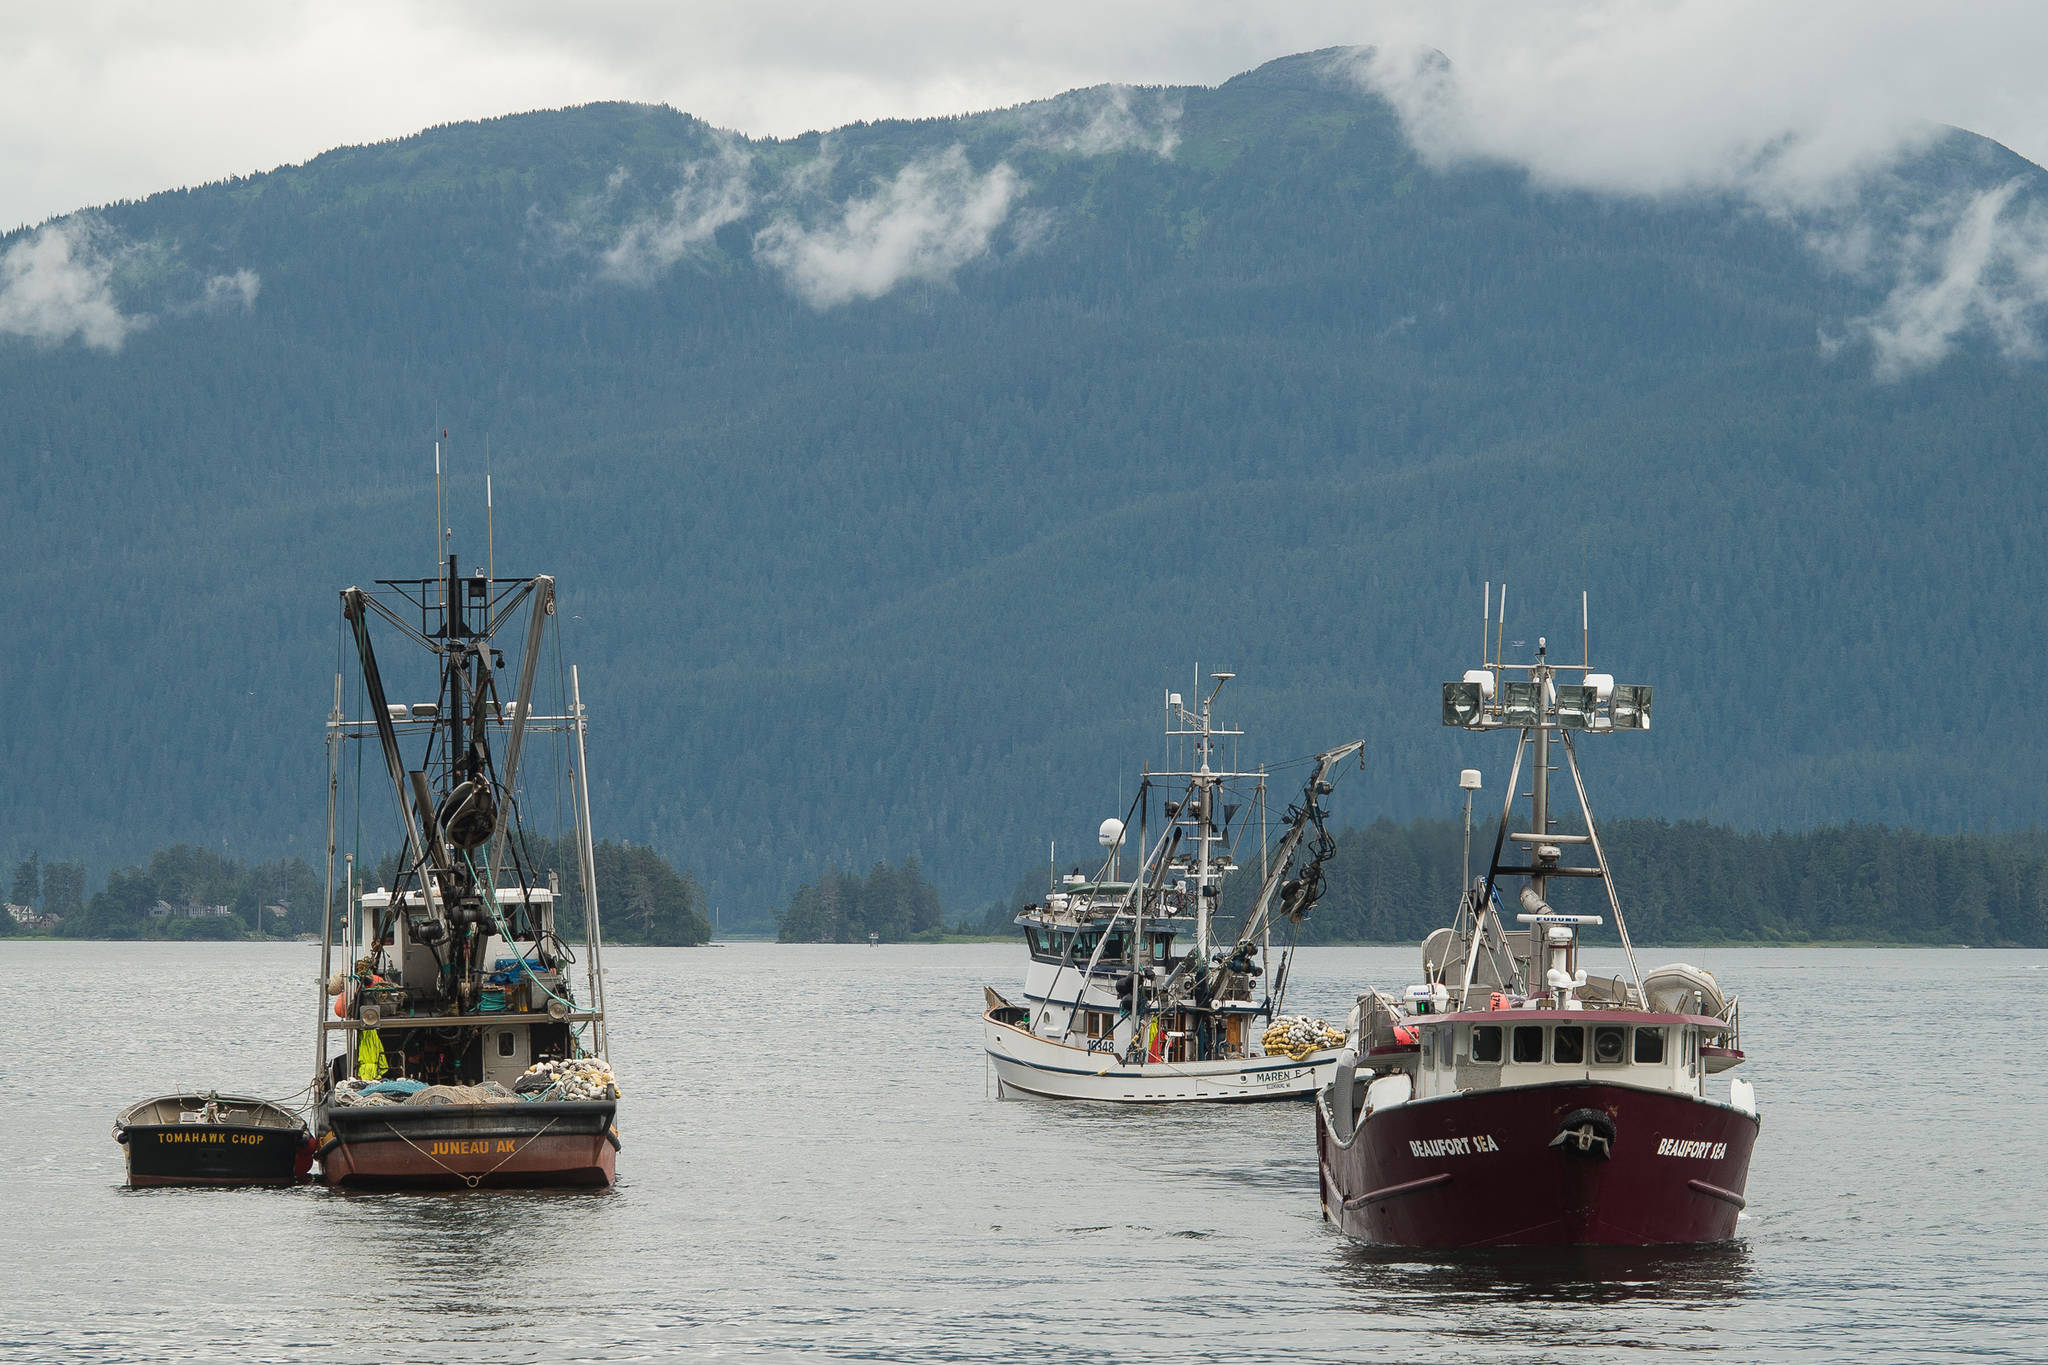 Capitol Live: Mariculture could be a $100 million industry in Alaska